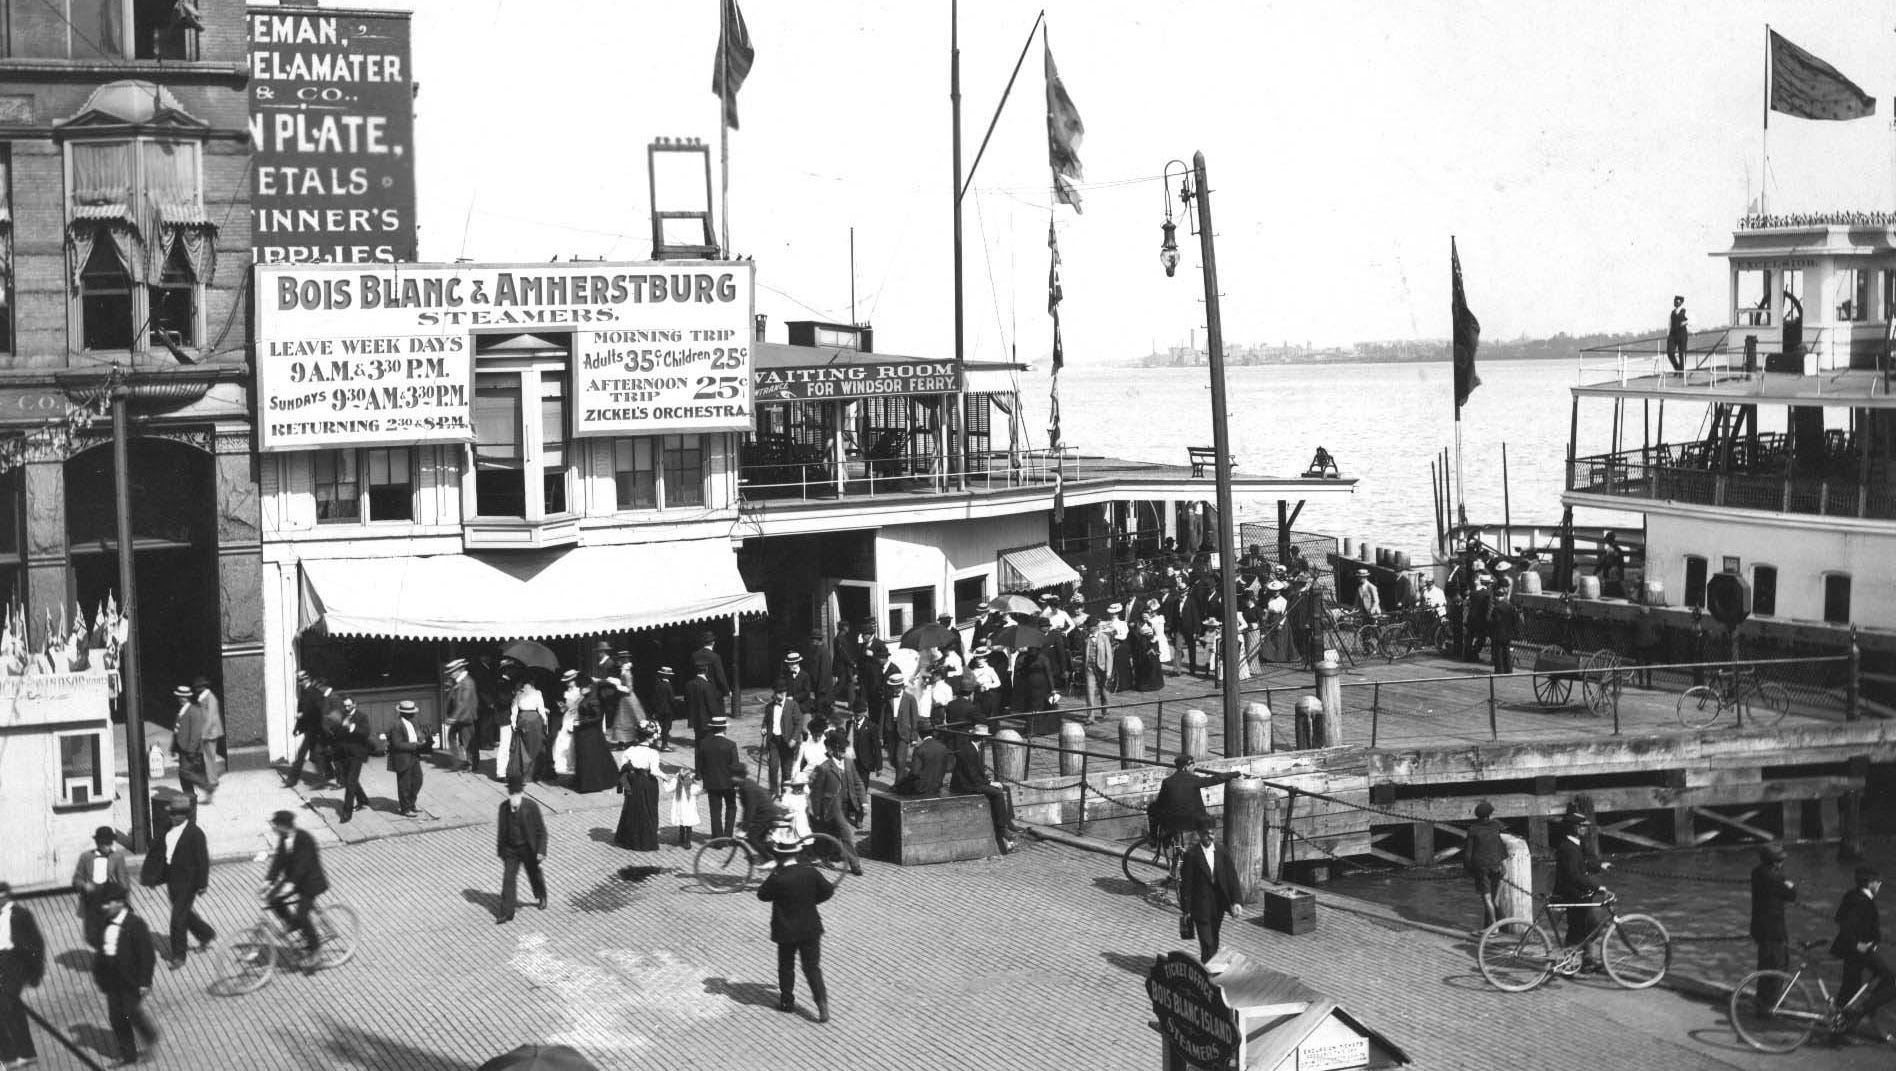 The old steamer docks at the foot of Woodward in Detroit are seen in a photo from the turn of the 20th century. Boats carried passengers to Boblo Island and Amherstburg, Ontario.